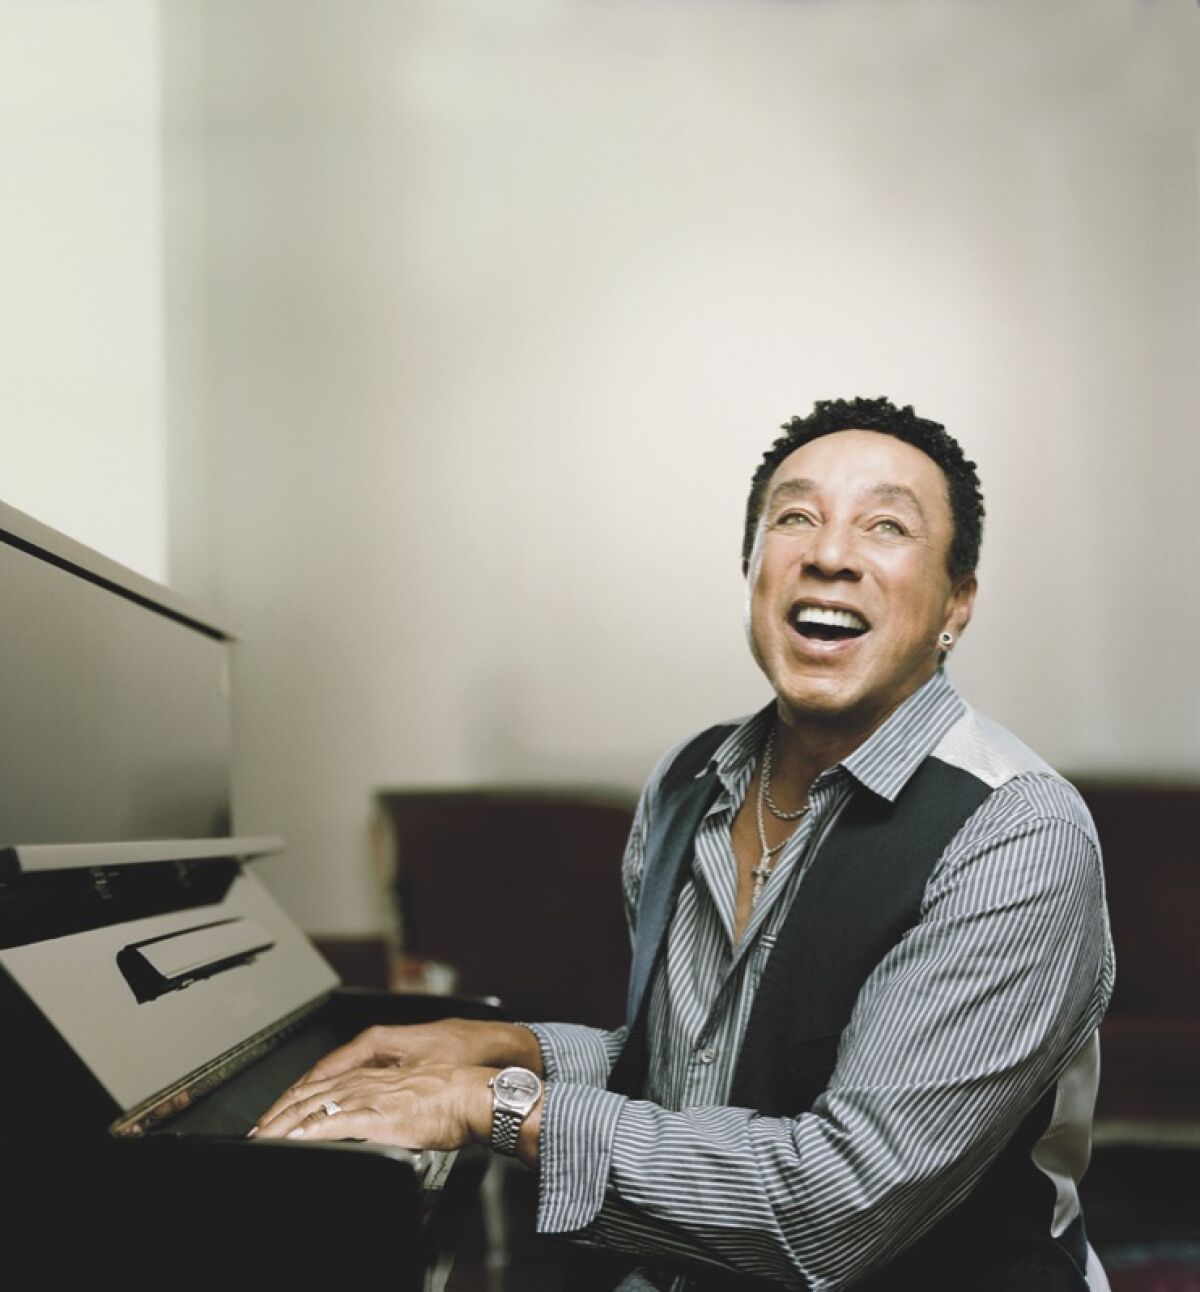 Motown music legend Smokey Robinson will perform at the San Diego County Fair's Grandstand Stage on June 15.